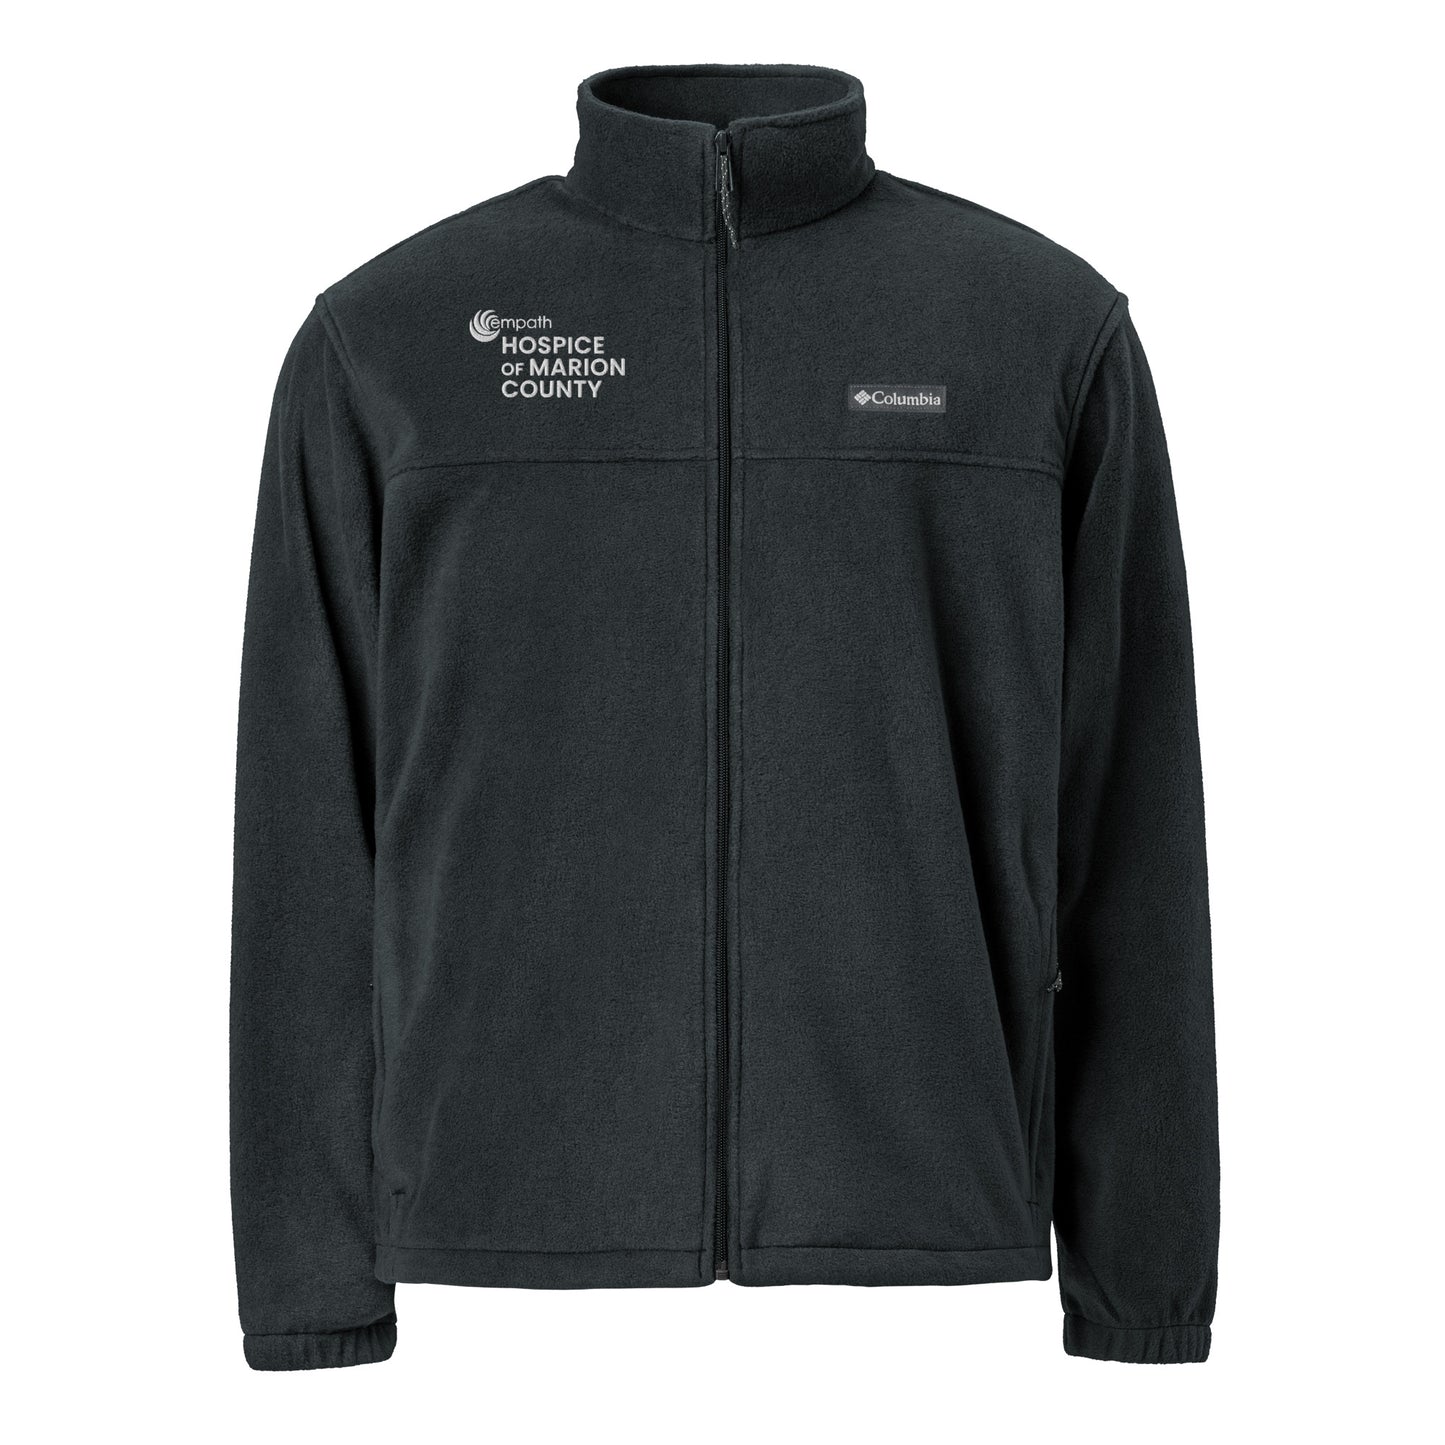 Columbia | Unisex fleece jacket (relaxed fit) - Hospice of Marion Coun ...